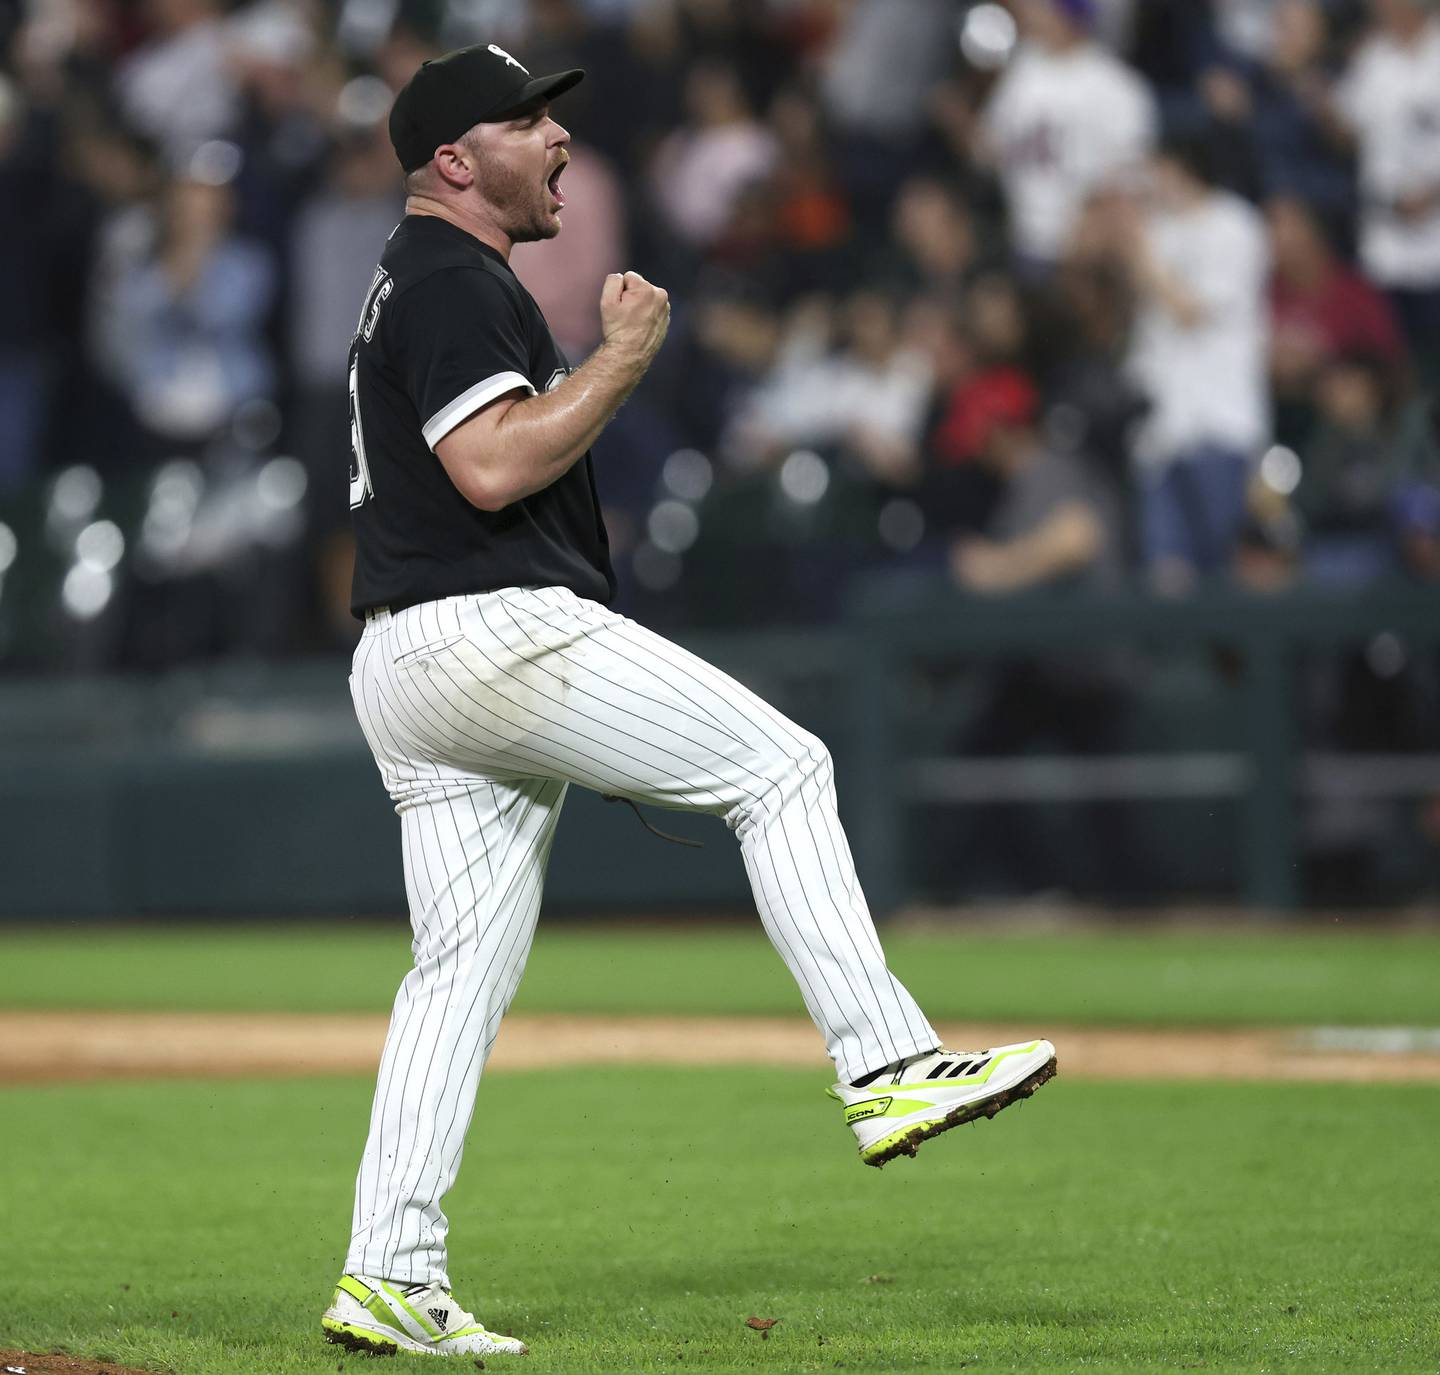 White Sox closer Liam Hendriks celebrates after closing out the Rockies in the ninth inning at Guaranteed Rate Field on Sept. 13, 2022.